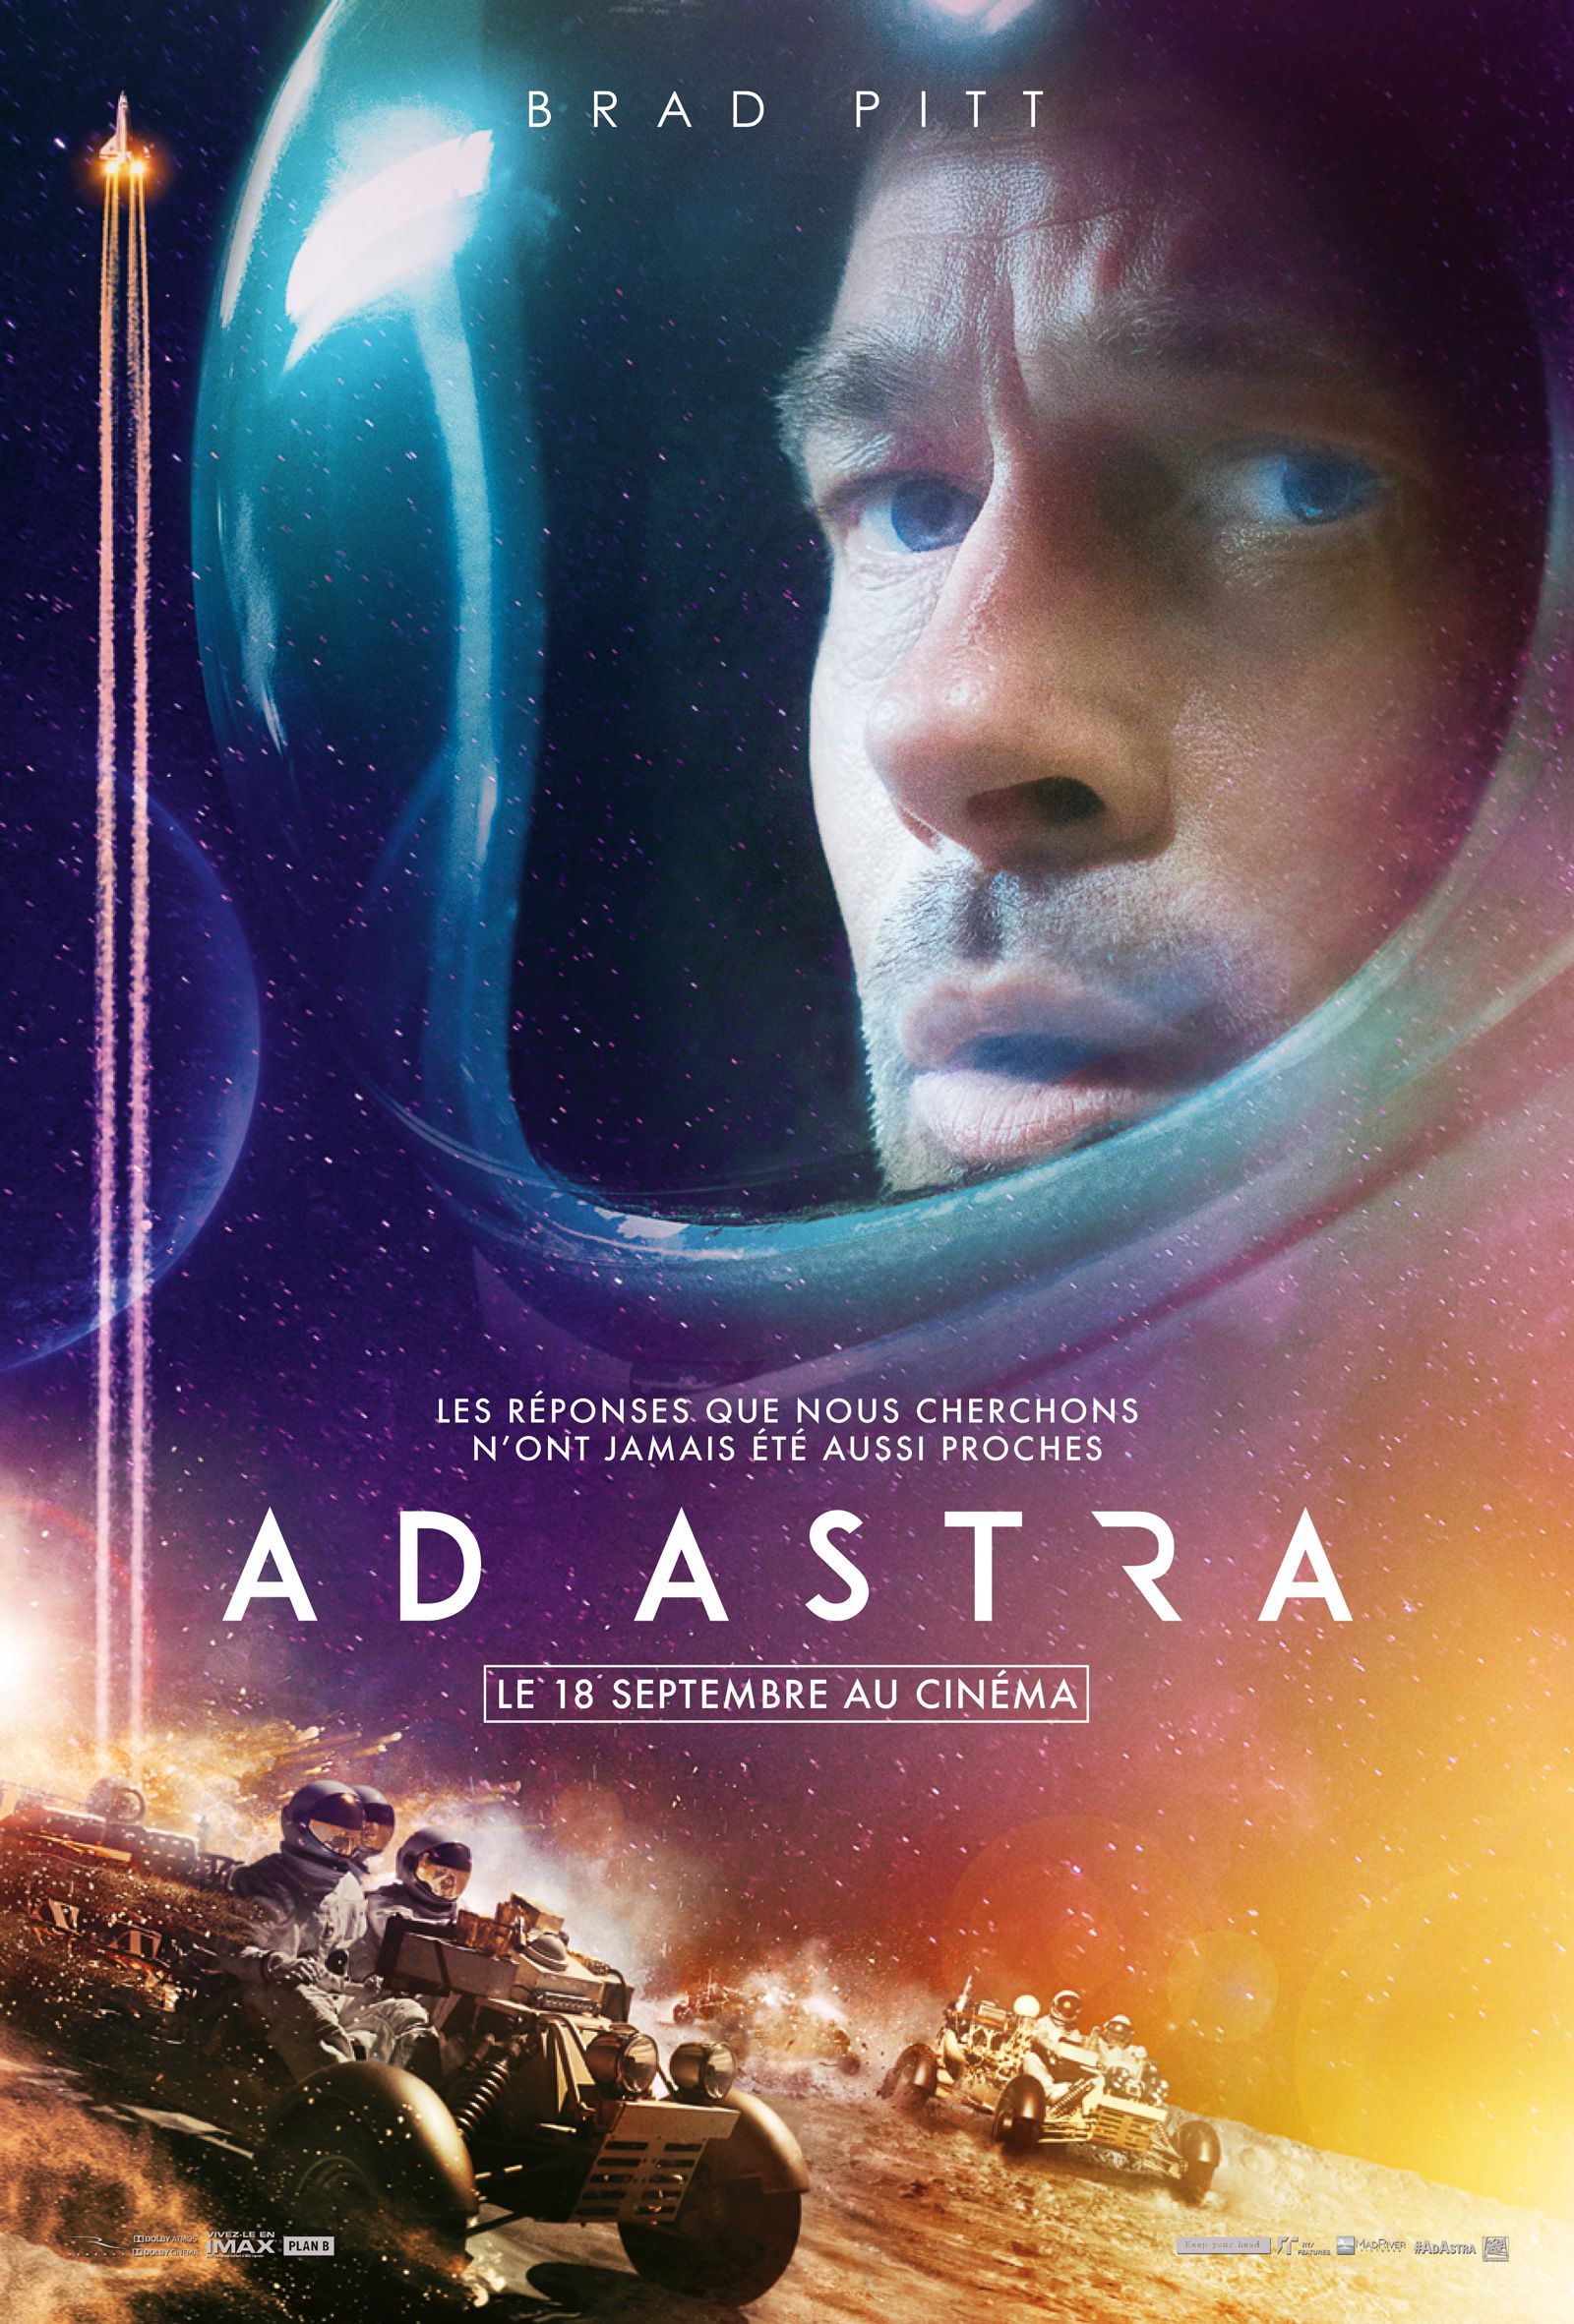 Ad Astra - Film (2019) streaming VF gratuit complet